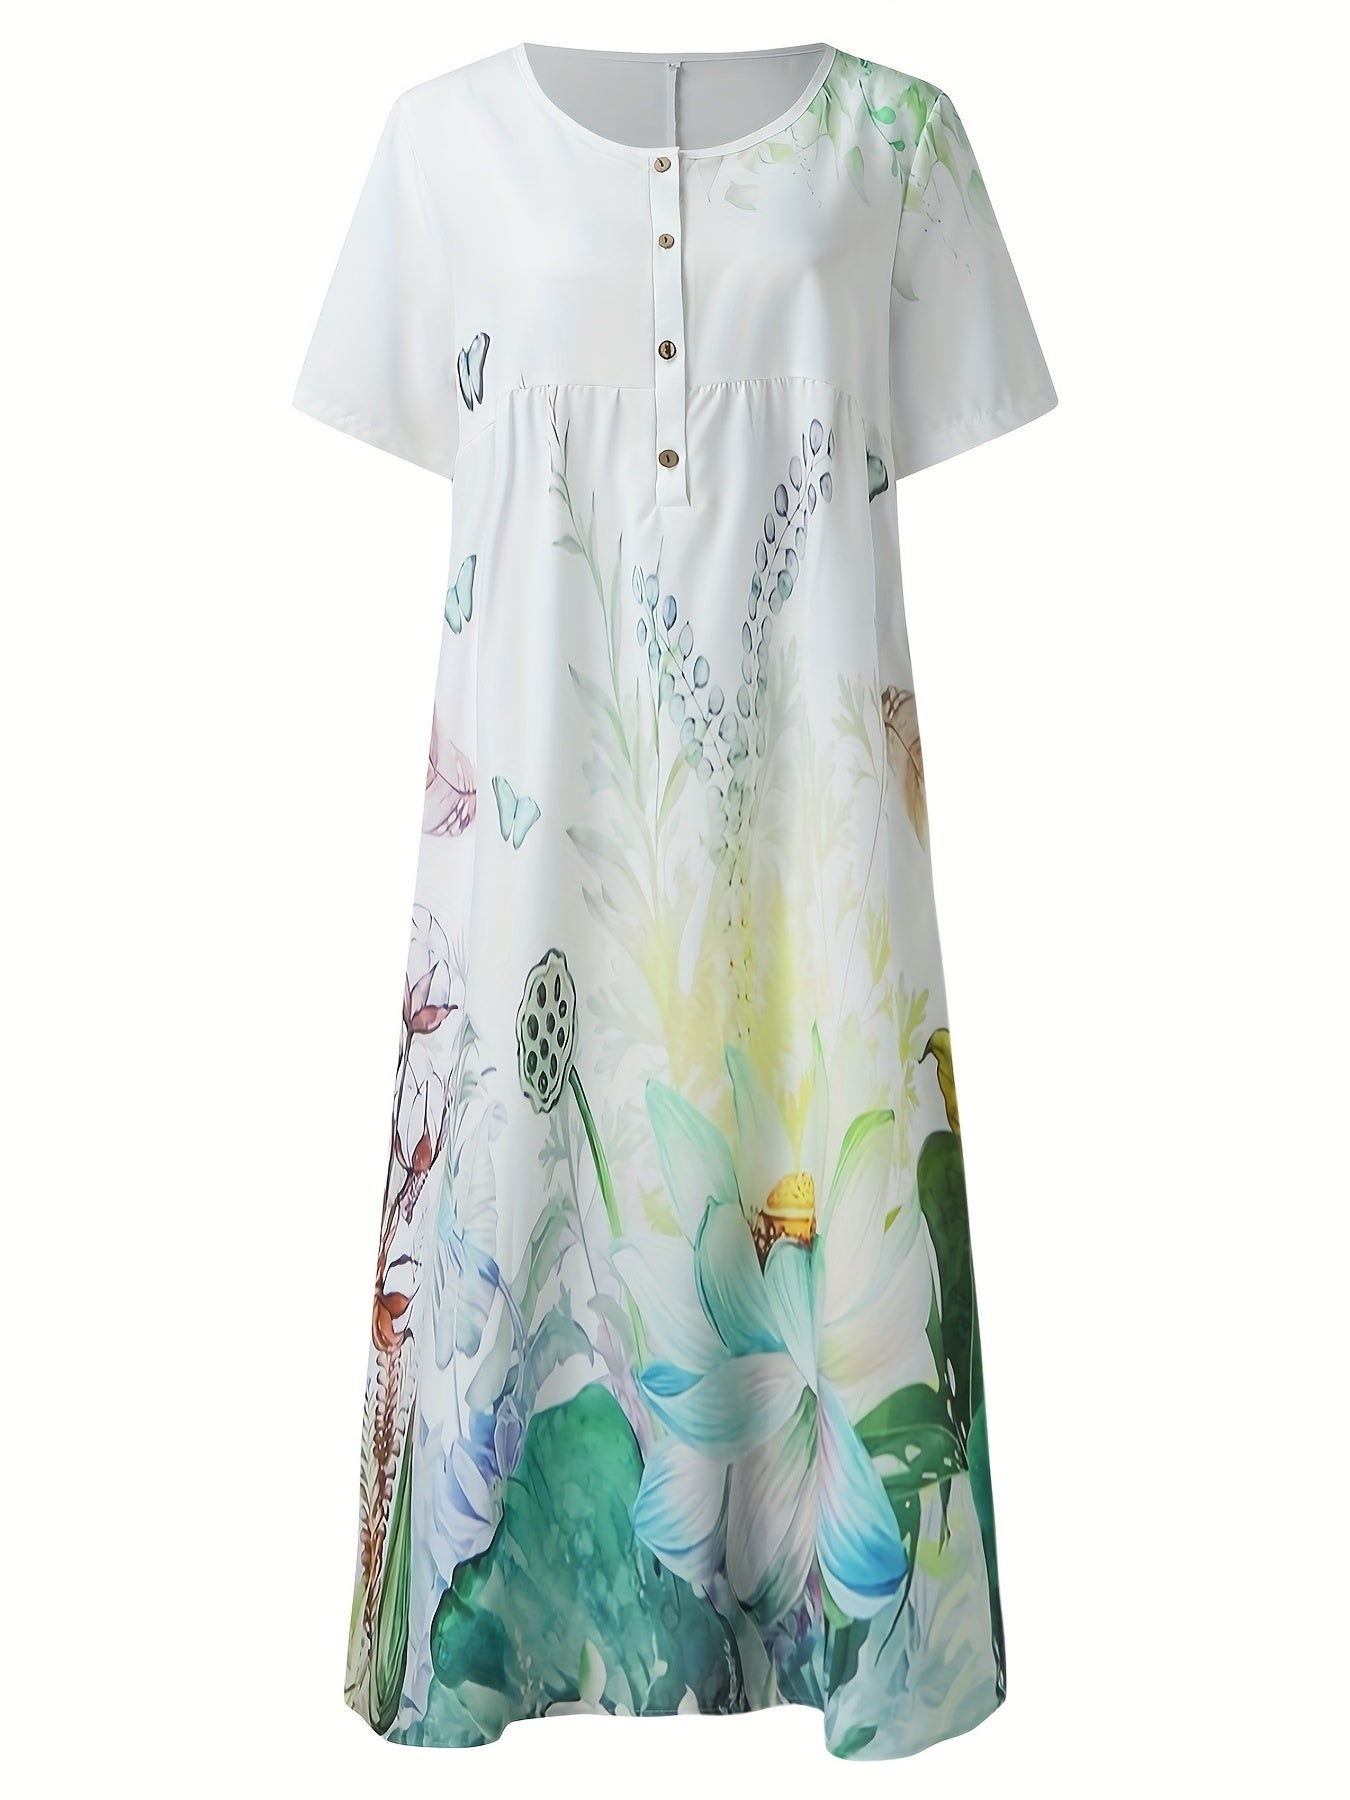 「binfenxie」Floral & Butterfly Print Button Dress, Casual Short Sleeve Dress For Spring & Summer, Women's Clothing